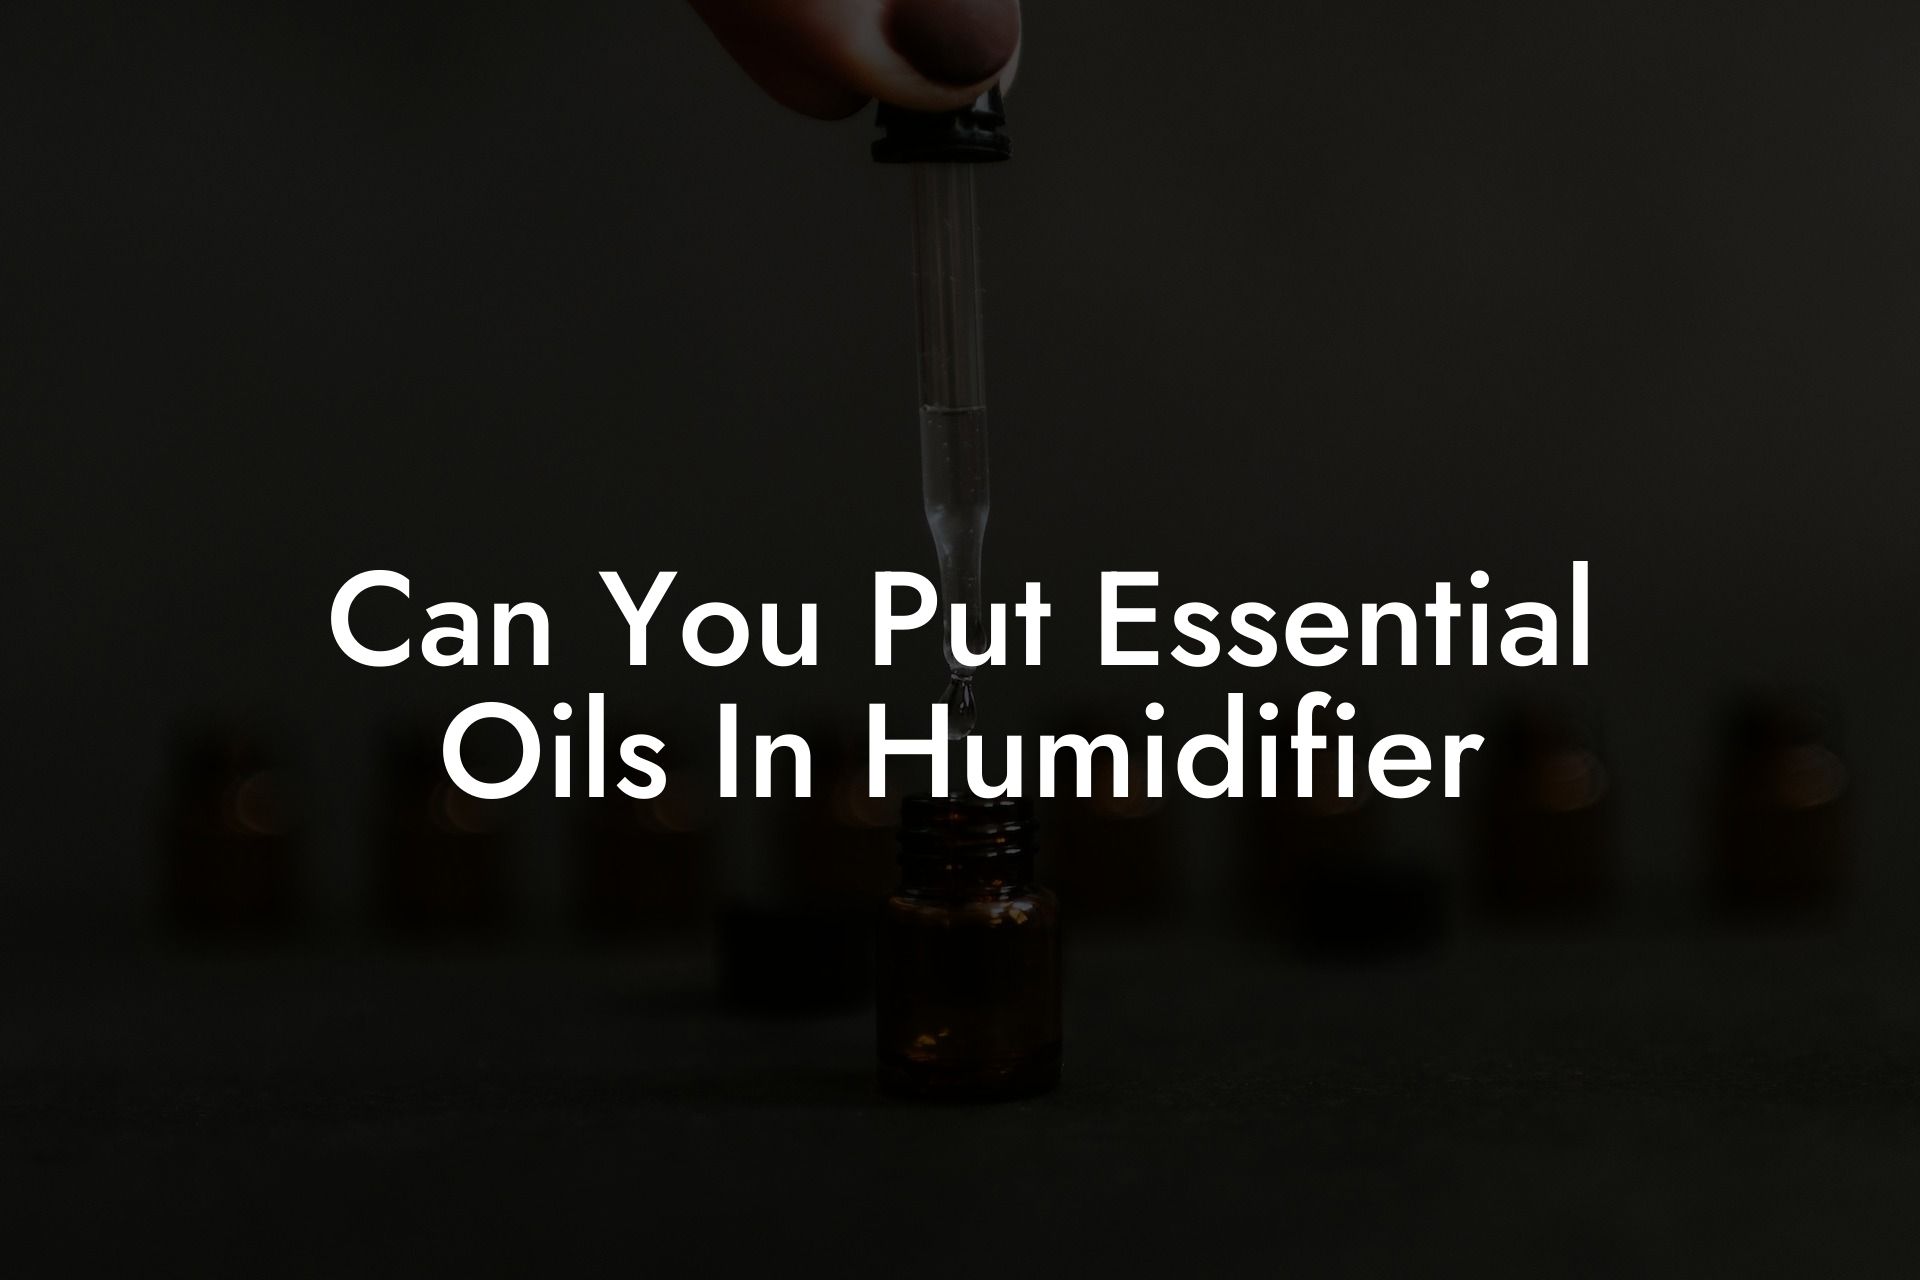 Can You Put Essential Oils In Humidifier